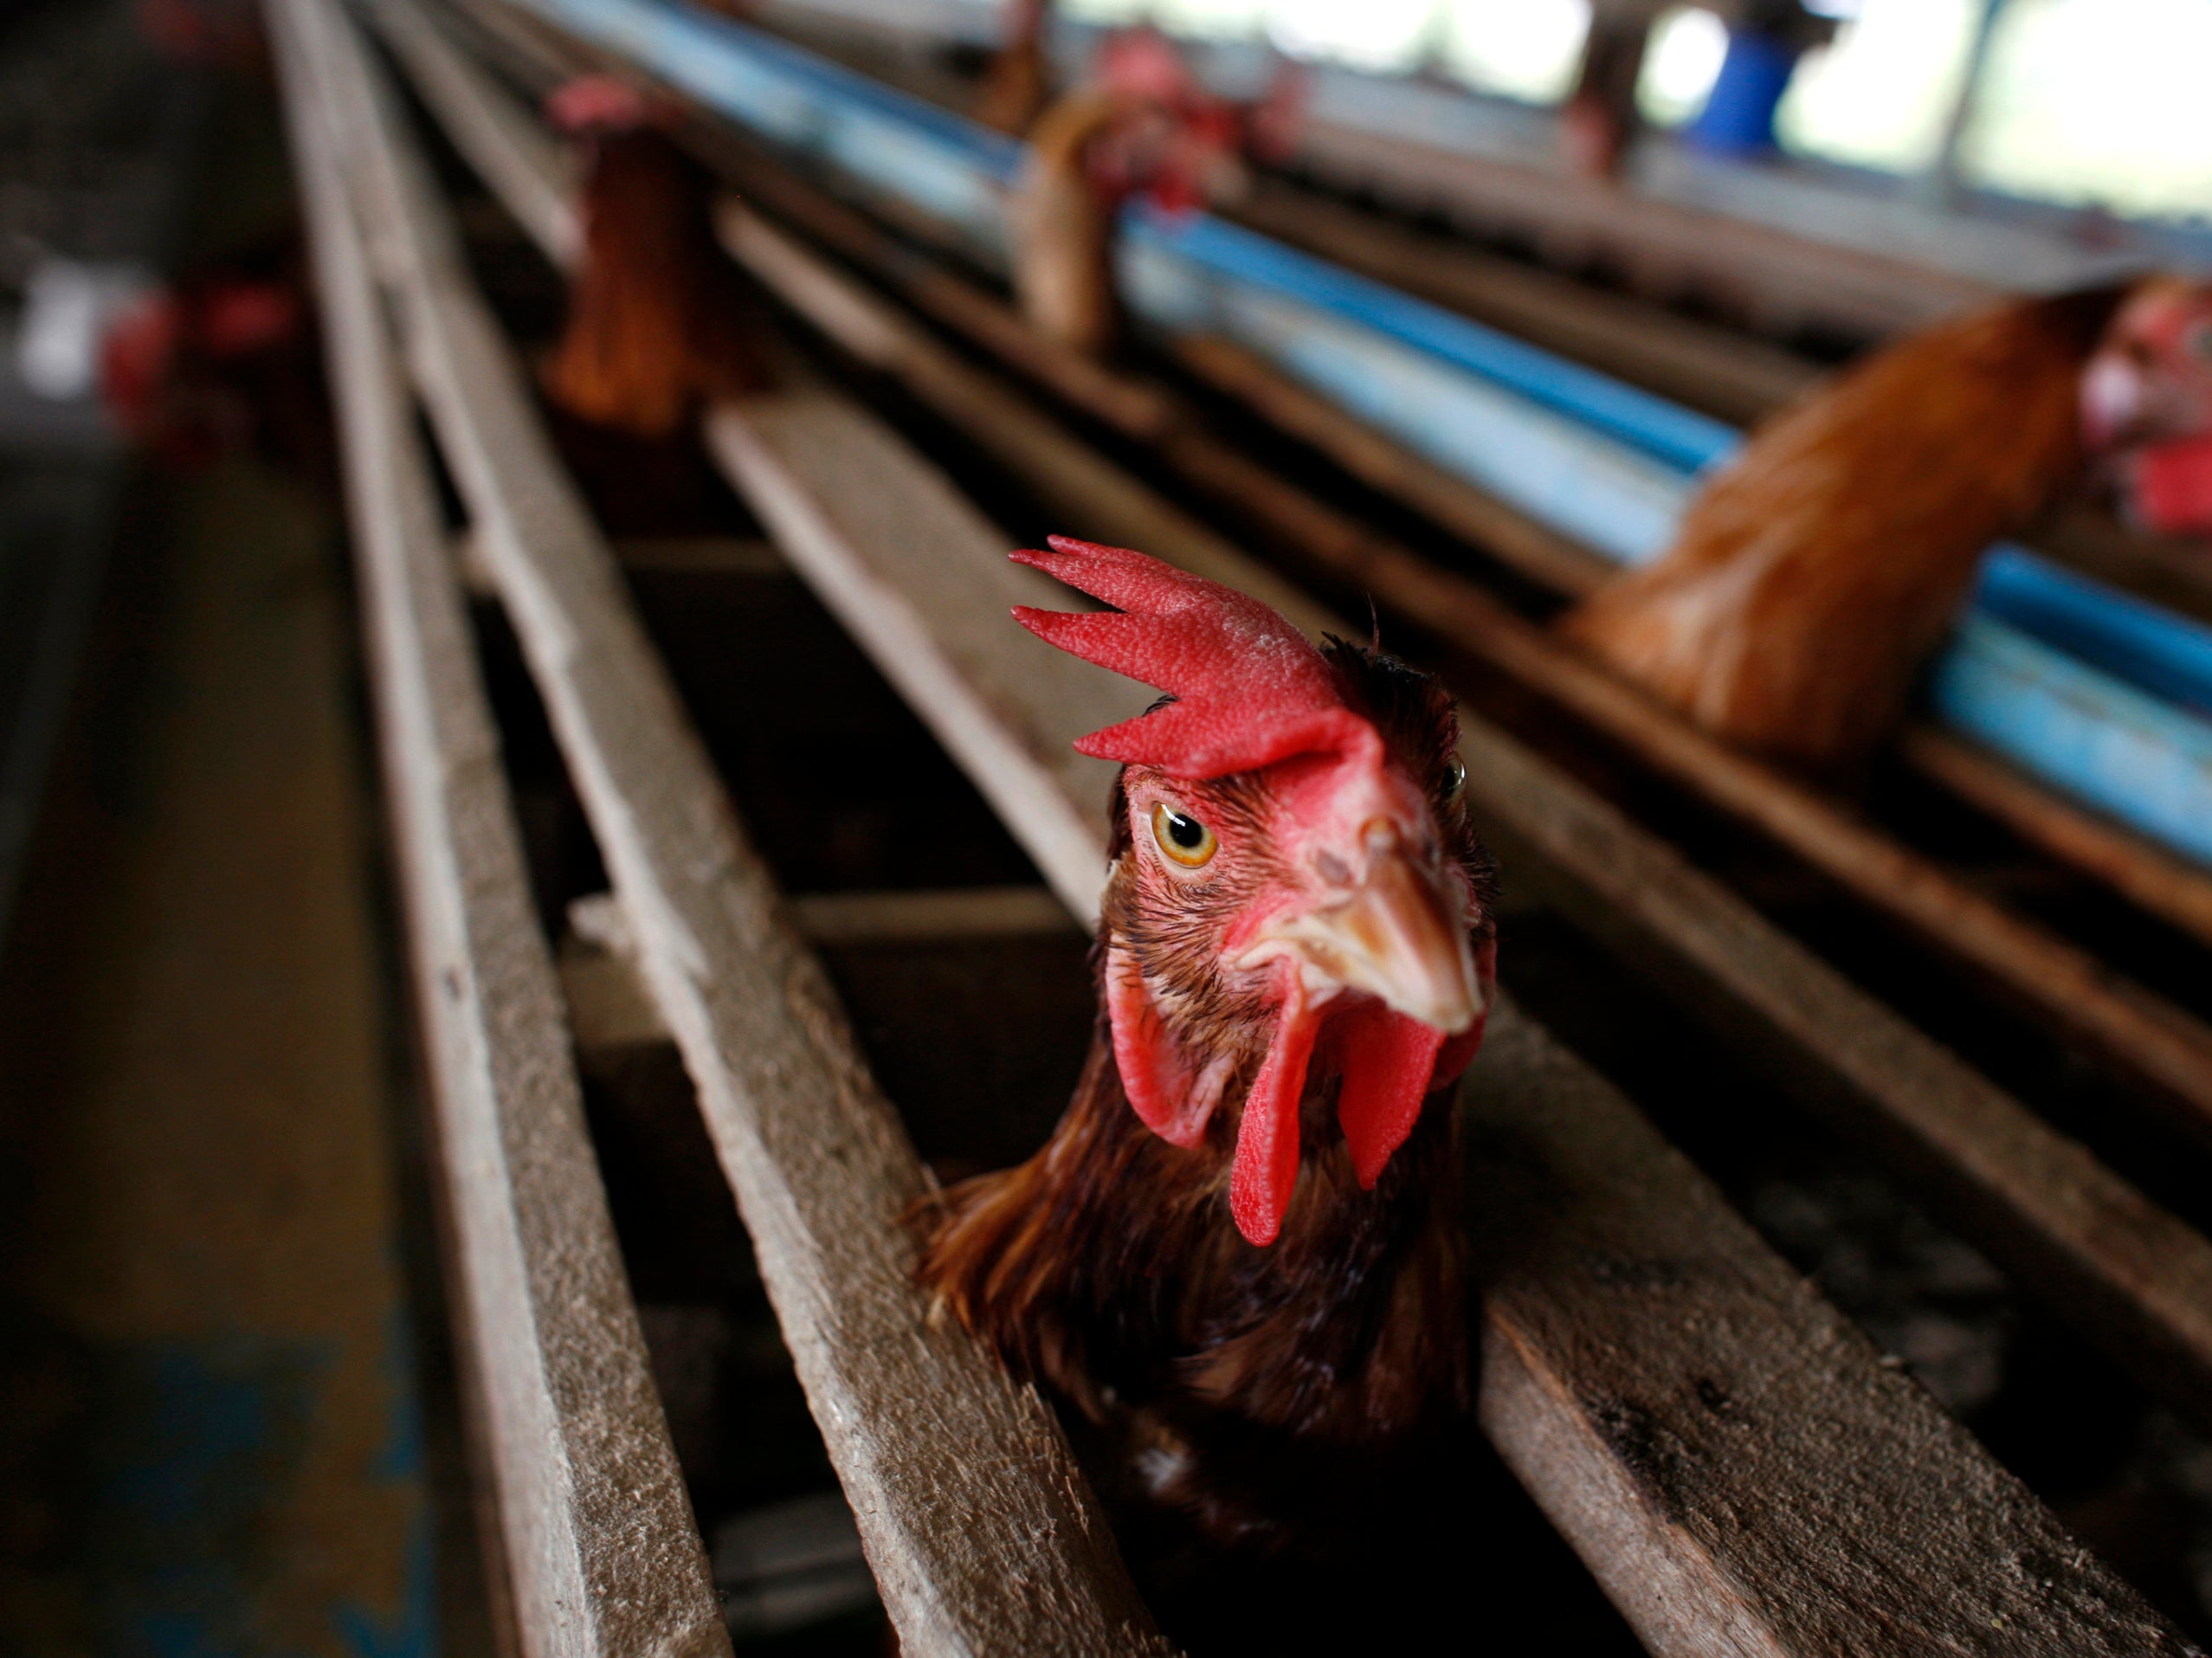 A woman in China was detected to have both H3N2 and H10N5 strains of bird flu